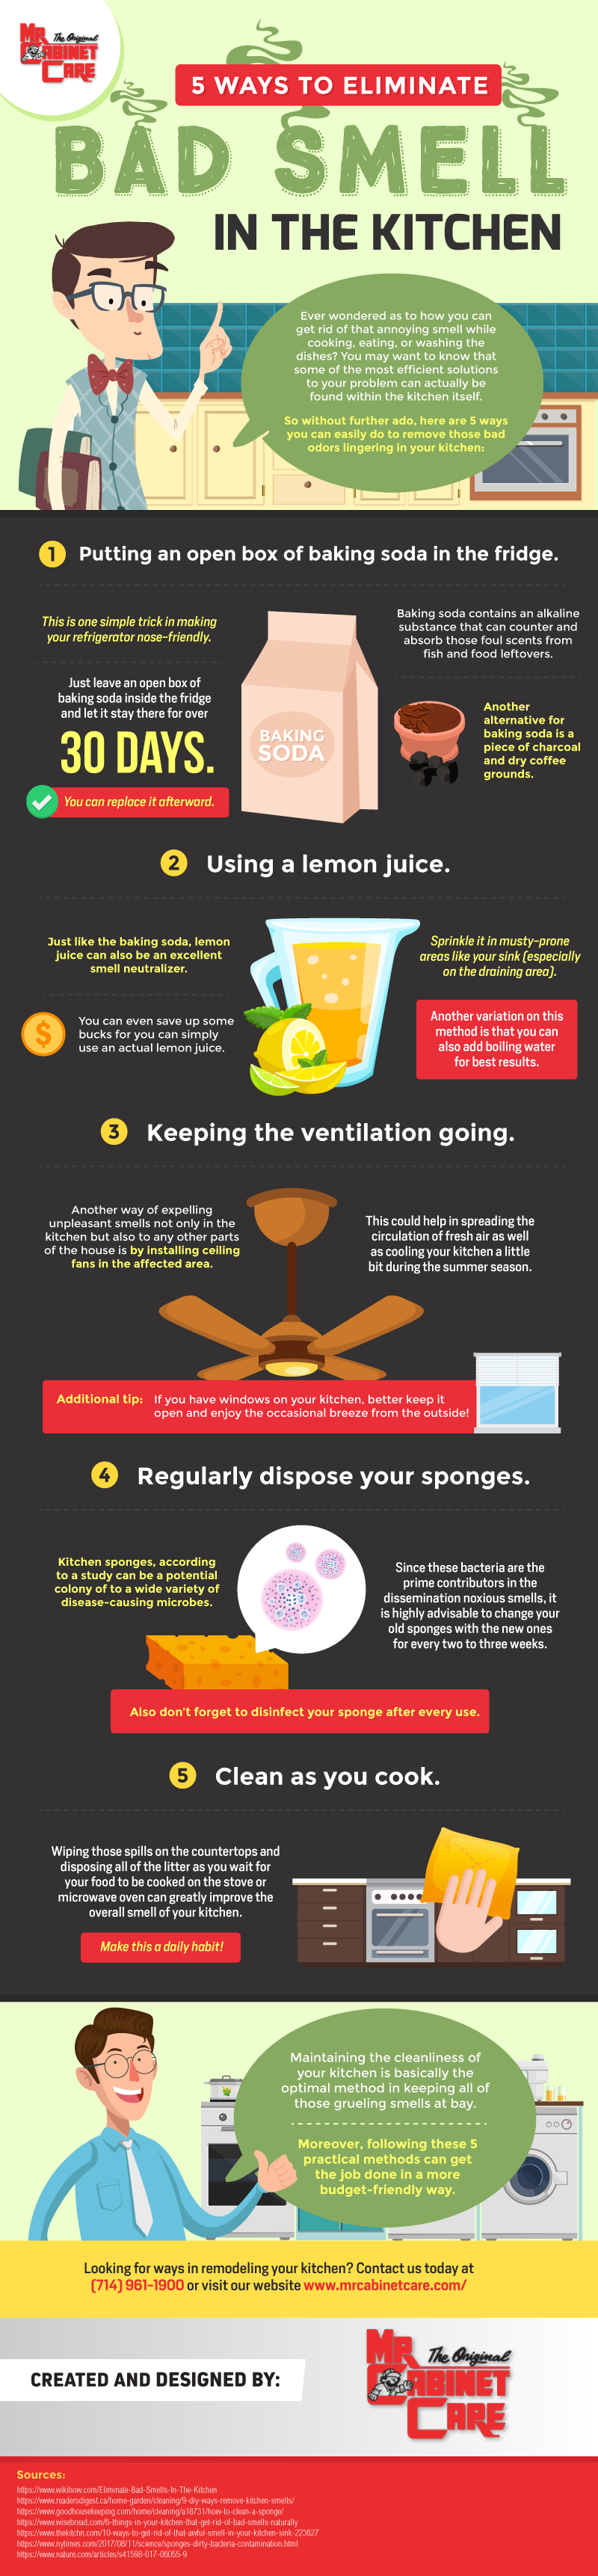 5 Ways to Eliminate Bad Smell in the Kitchen - Infographic